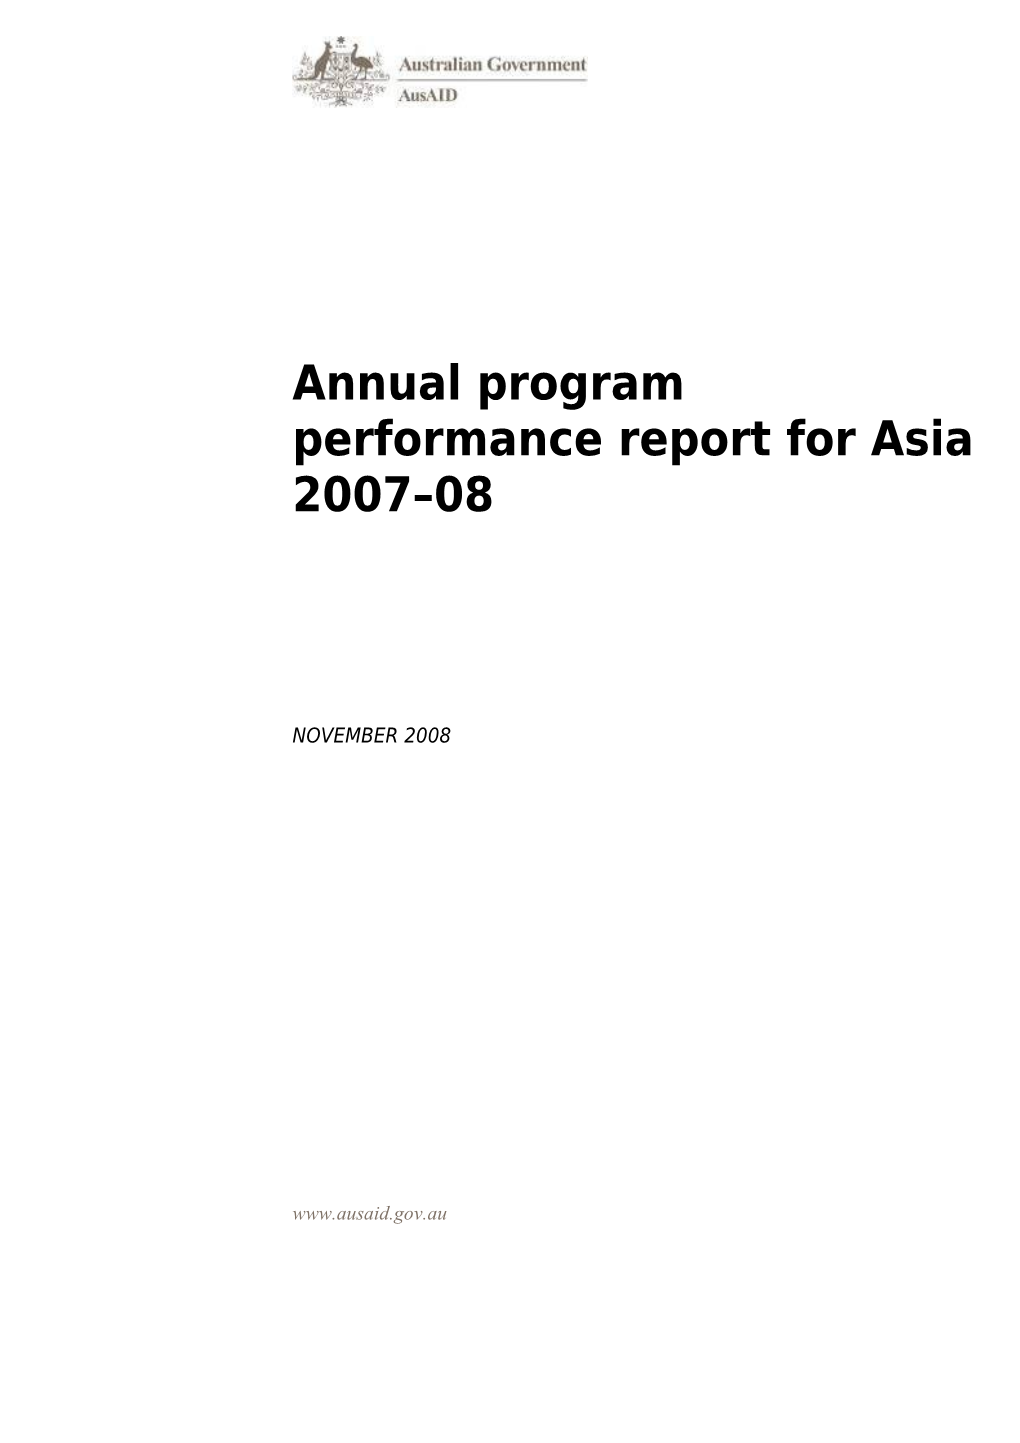 Annual Program Performance Report for Asia 2007 2008